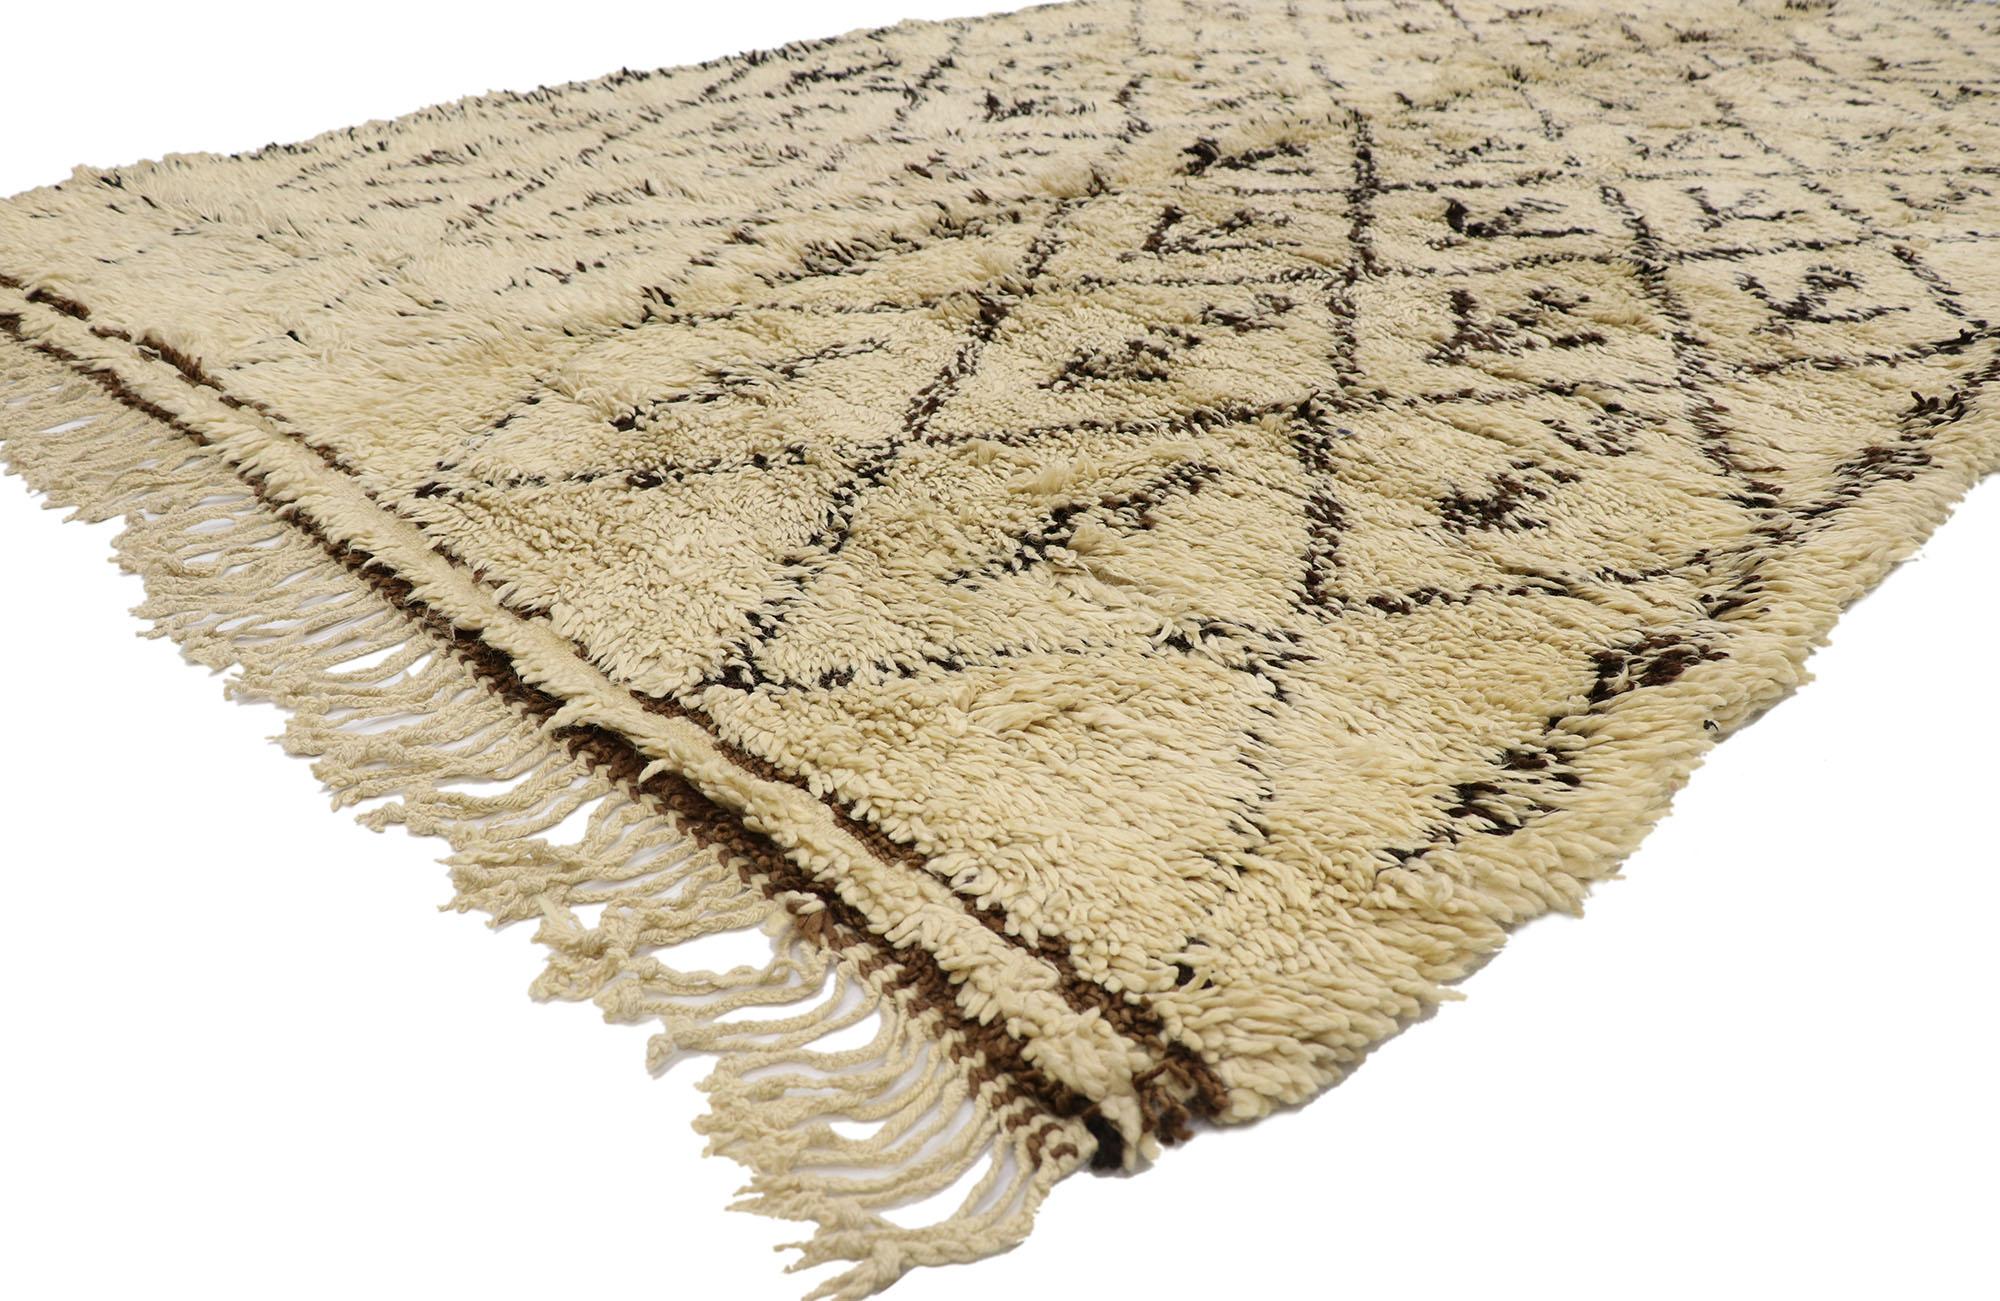 21403 Vintage Berber Beni Ourain Moroccan rug with Tribal Style 07'01 x 14'00. With its simplicity, plush pile and tribal style, this hand knotted wool vintage Berber Beni Ourain Moroccan rug is a captivating vision of woven beauty. It features a